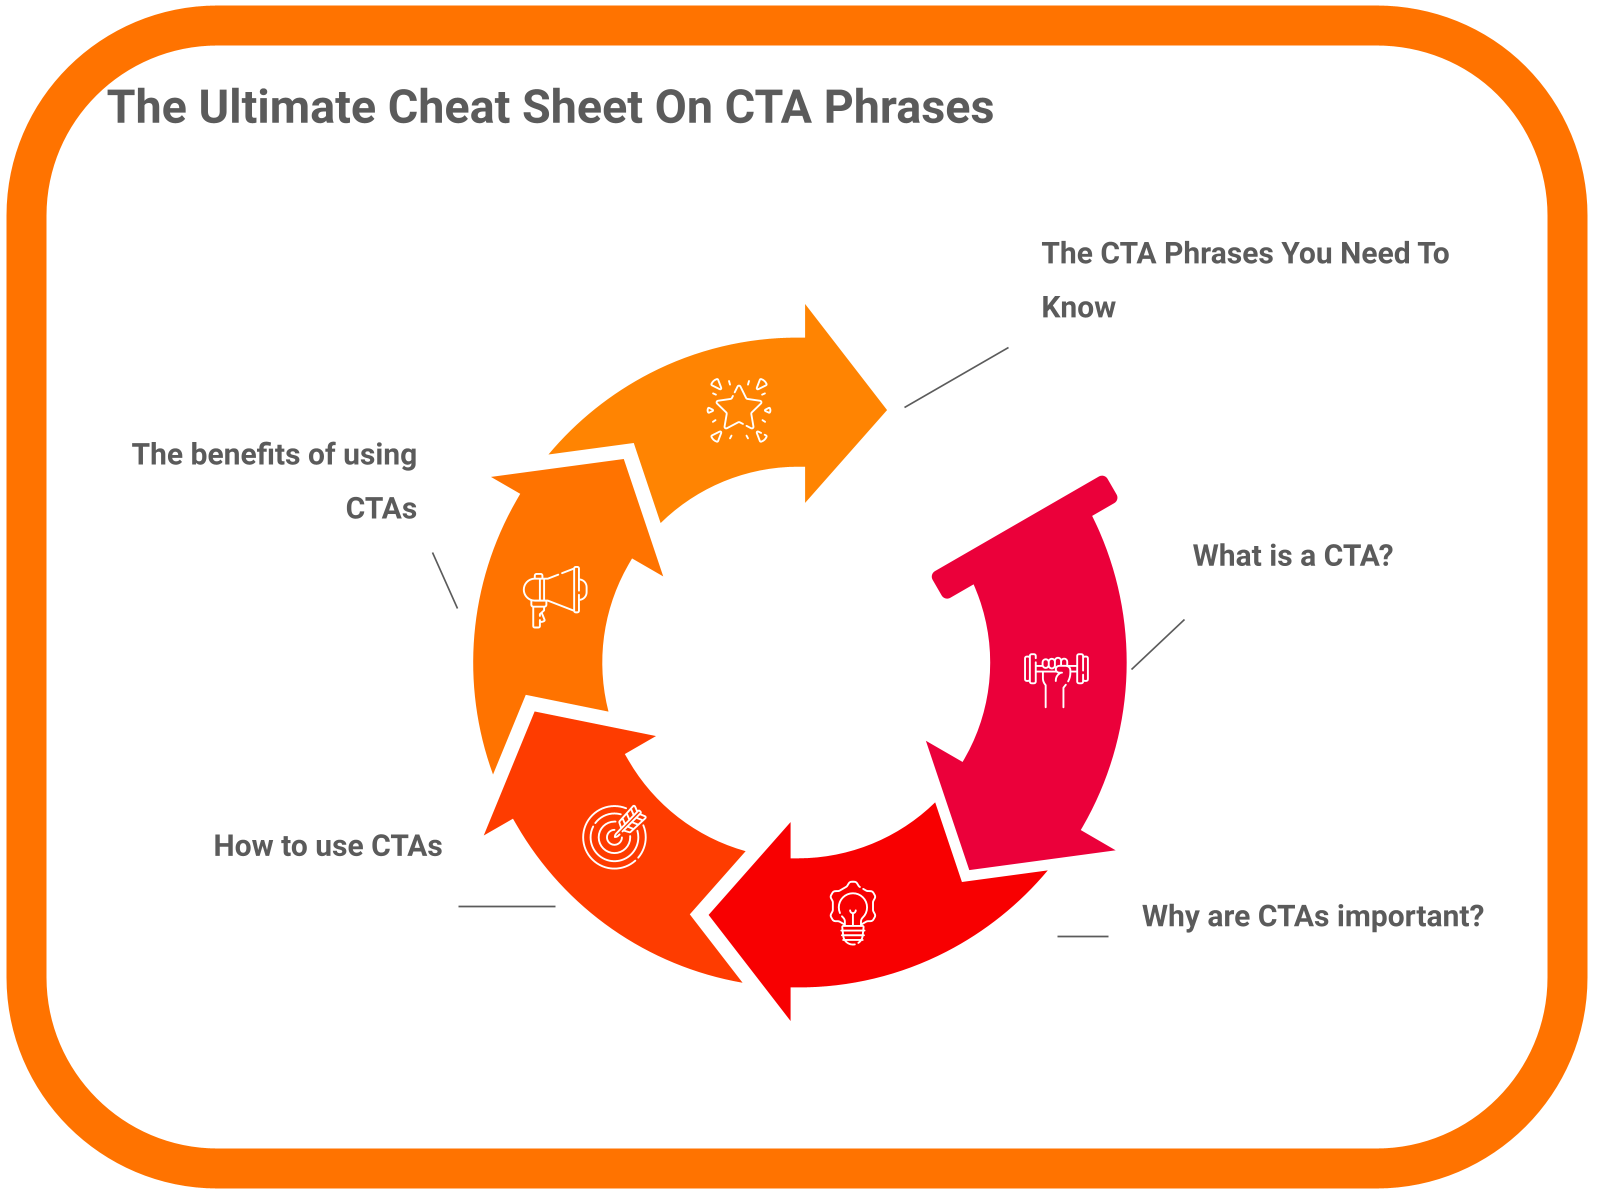 The Ultimate Cheat Sheet On CTA Phrases